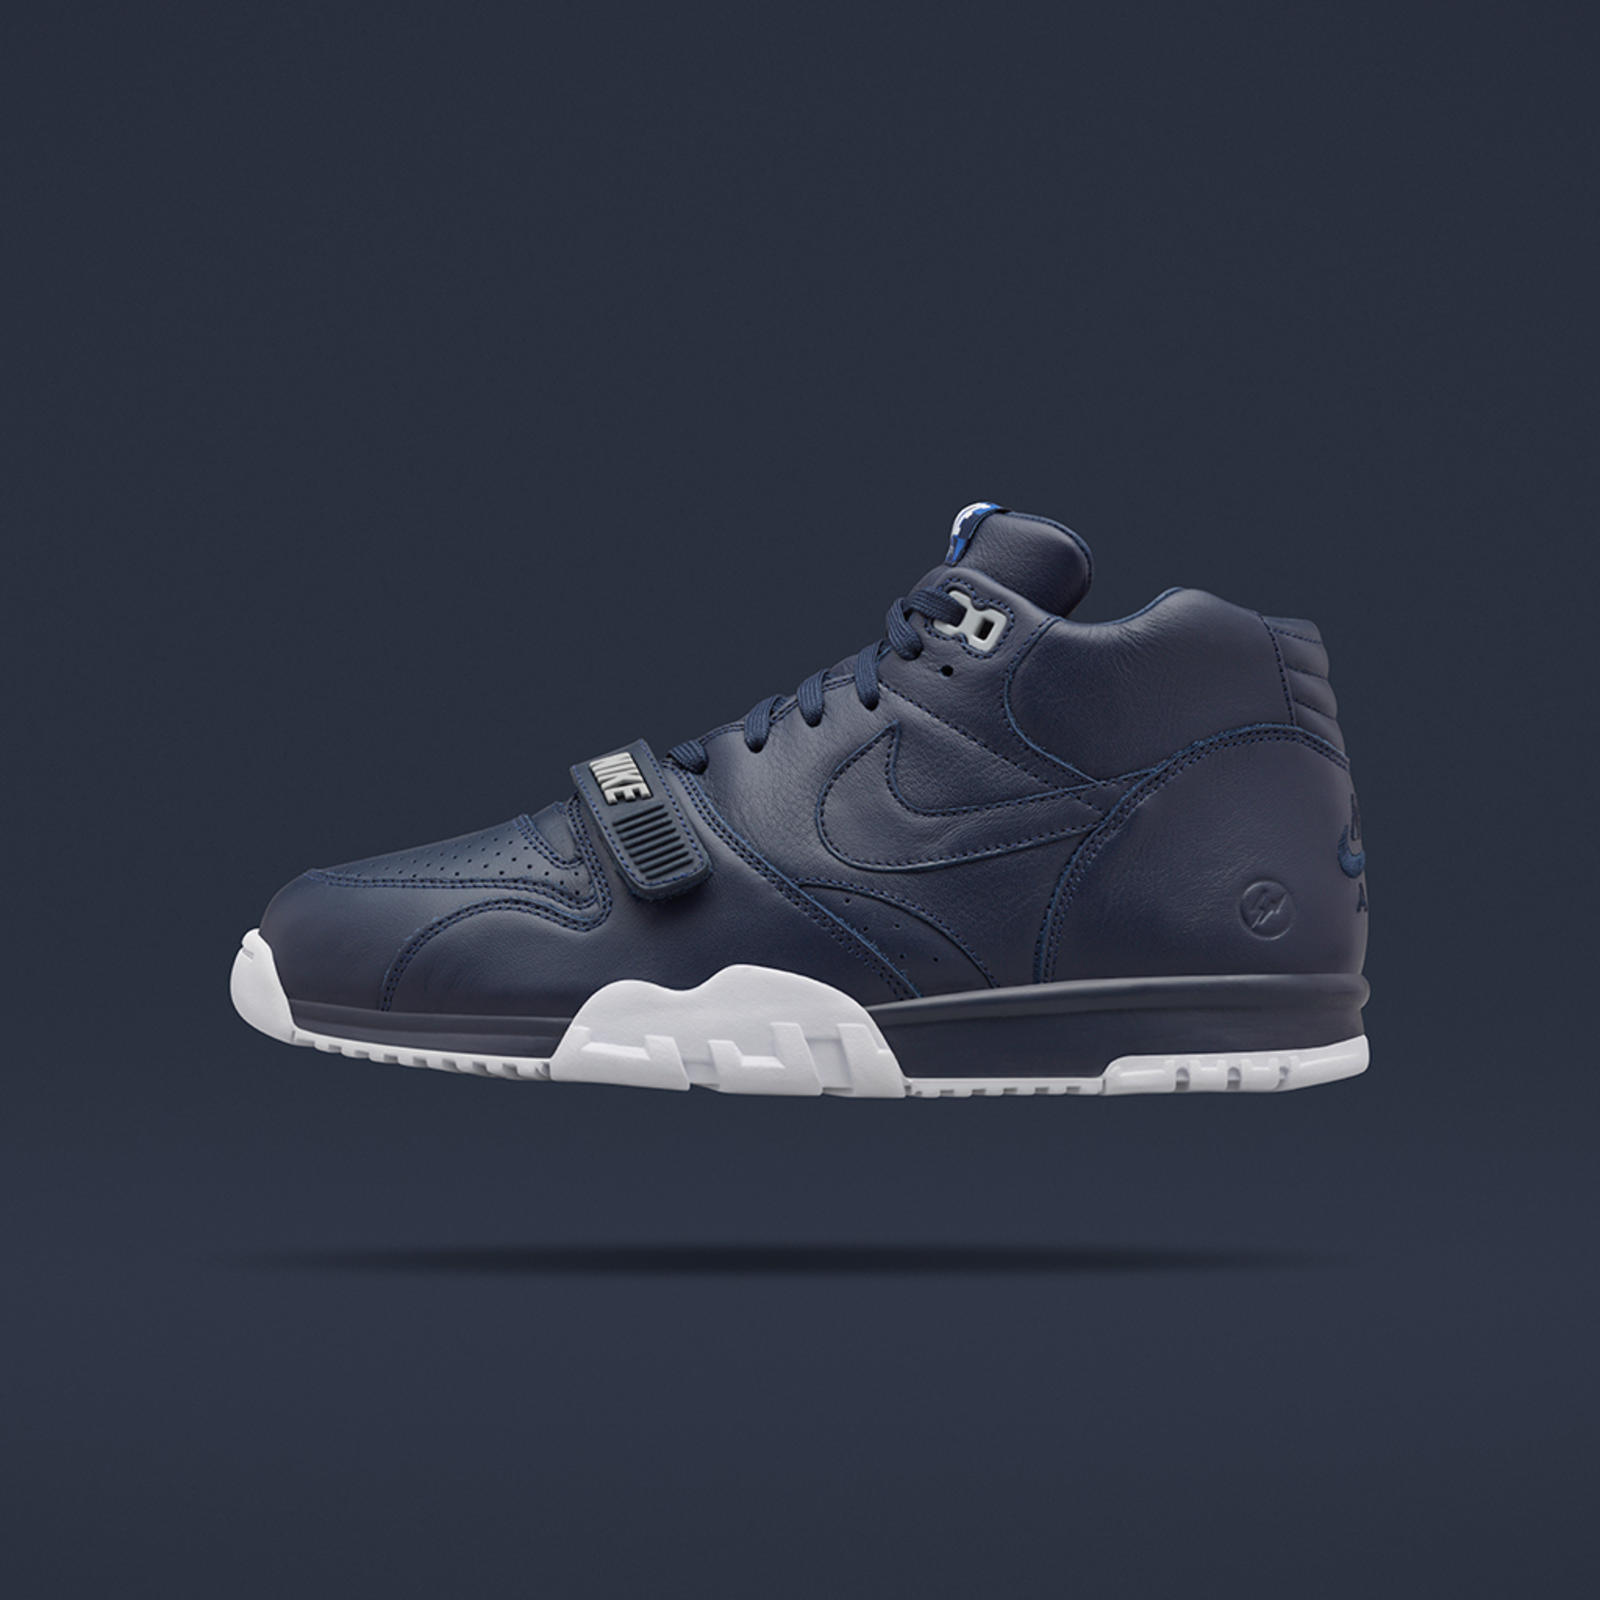 NIKECOURT AIR TRAINER 1 MID X fragment | SHOES MASTER